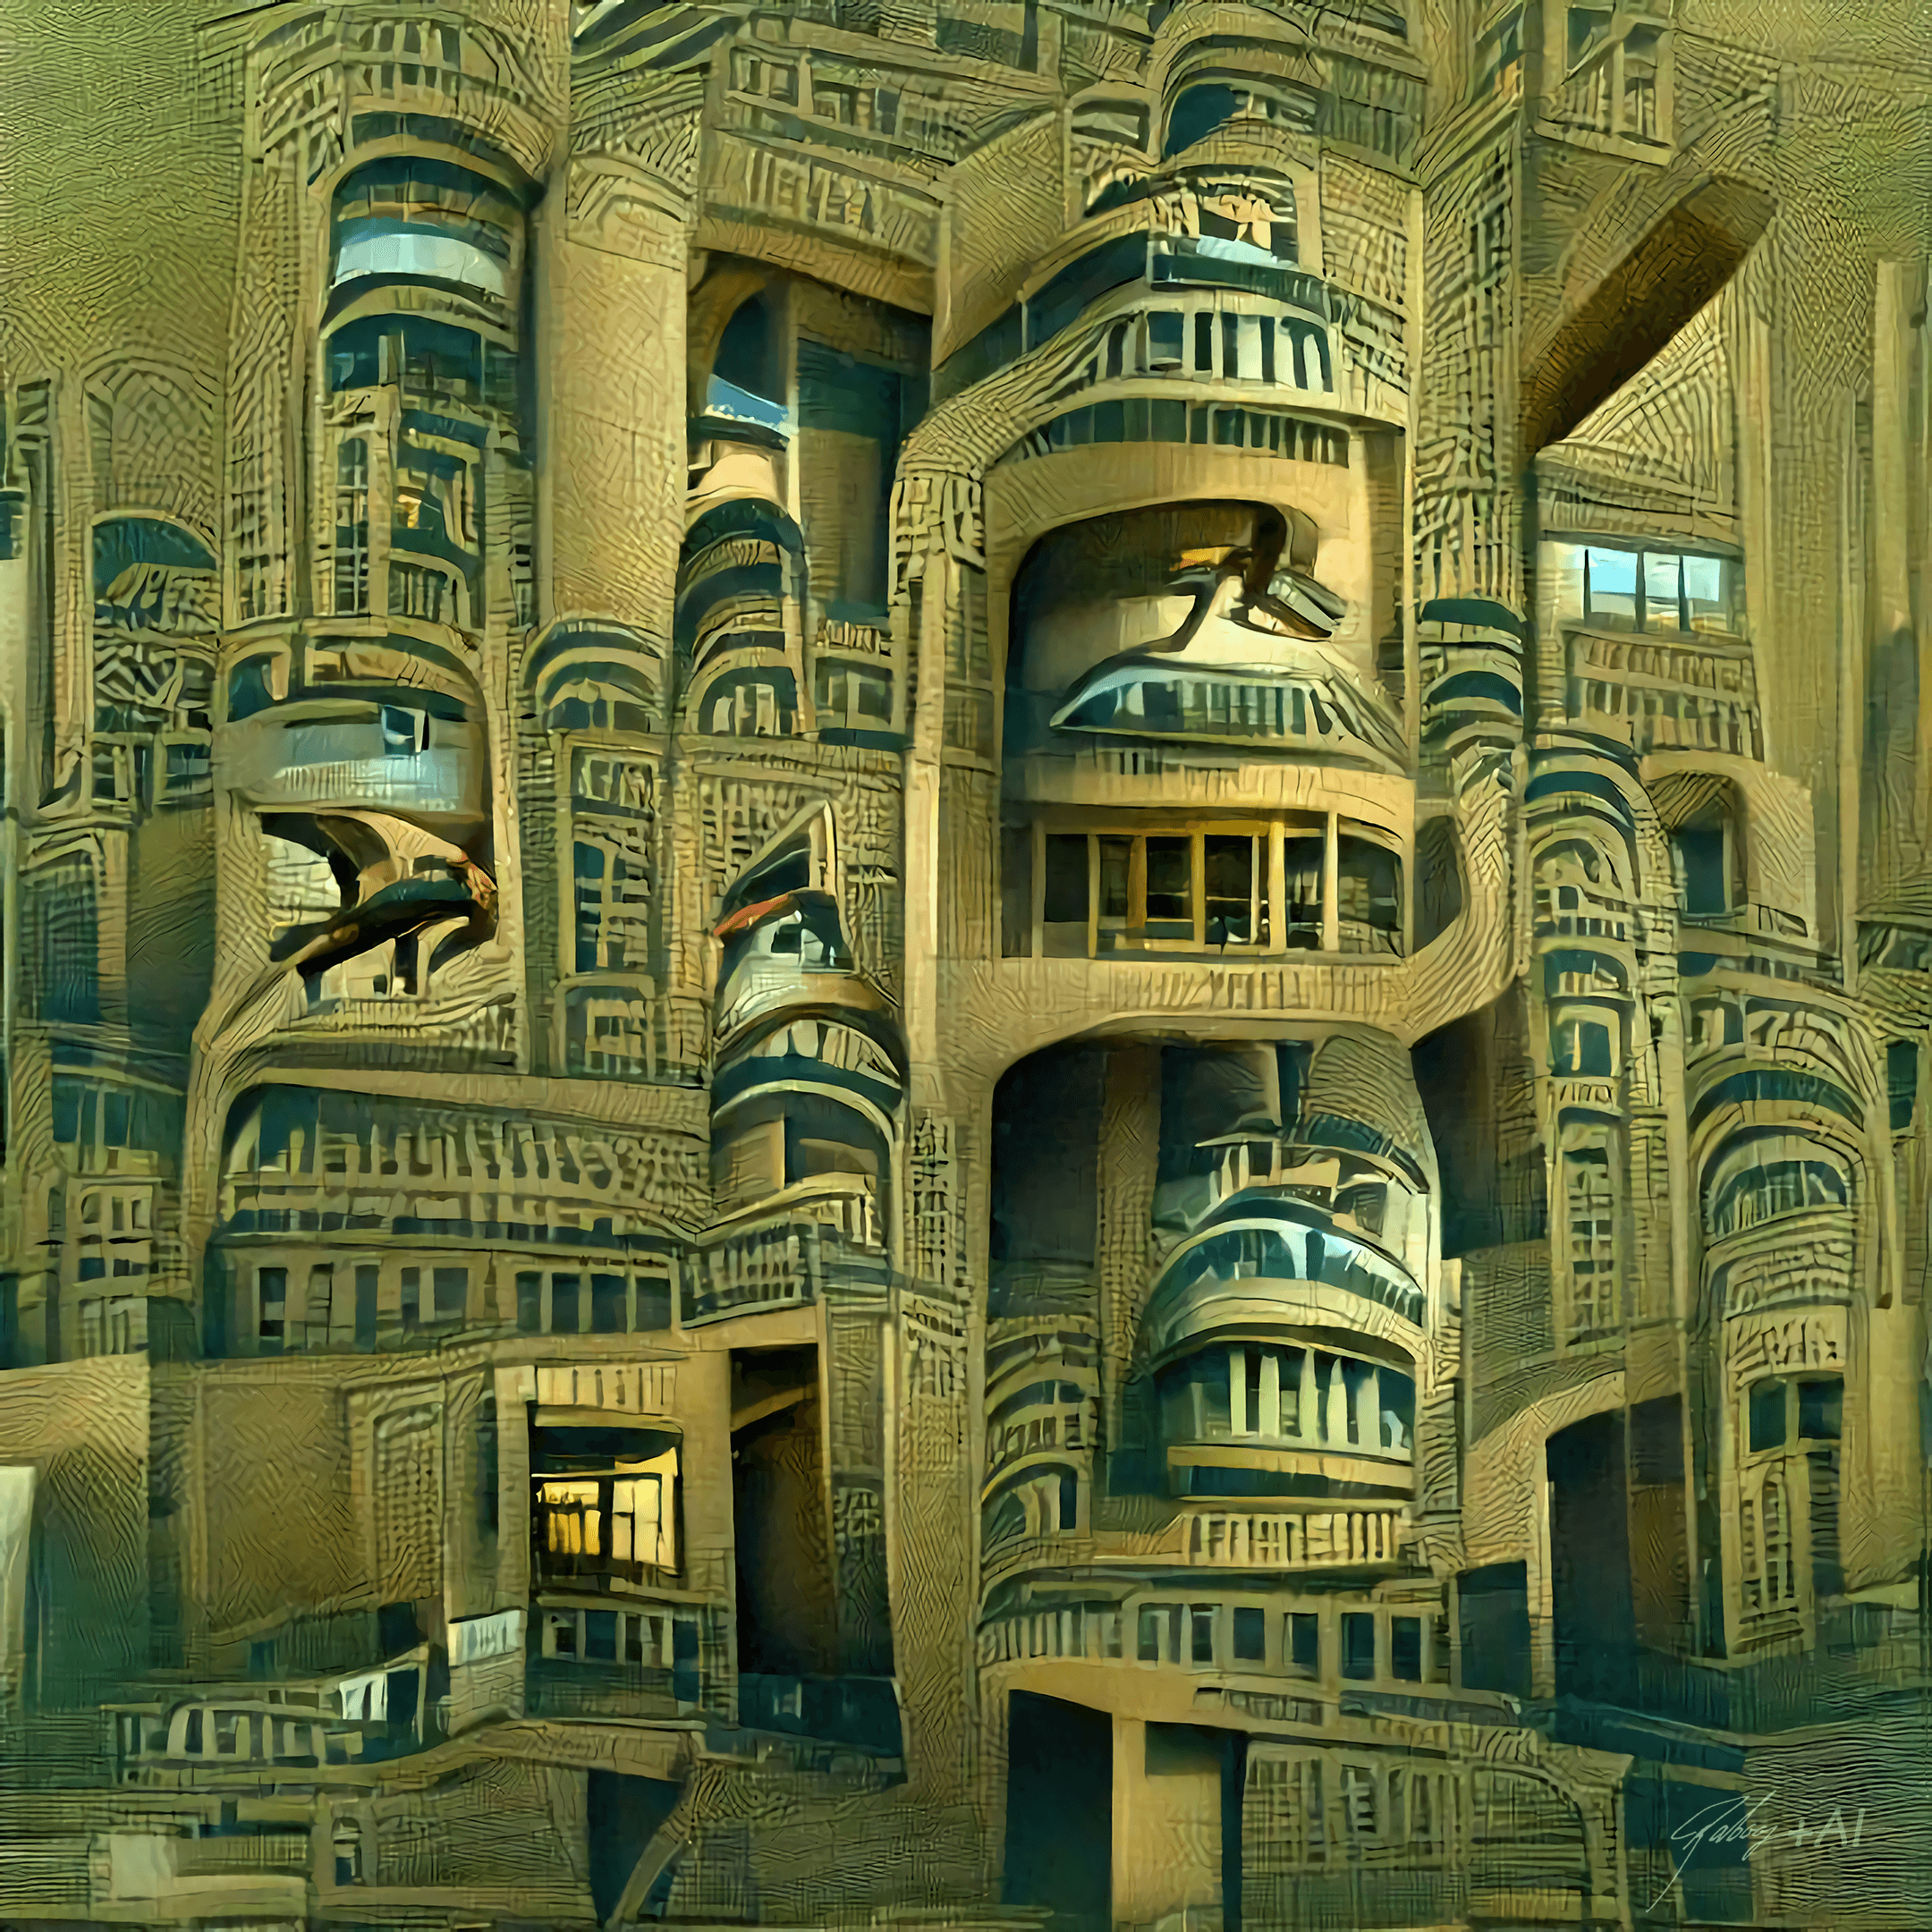 4 dimensional Egyptian office building